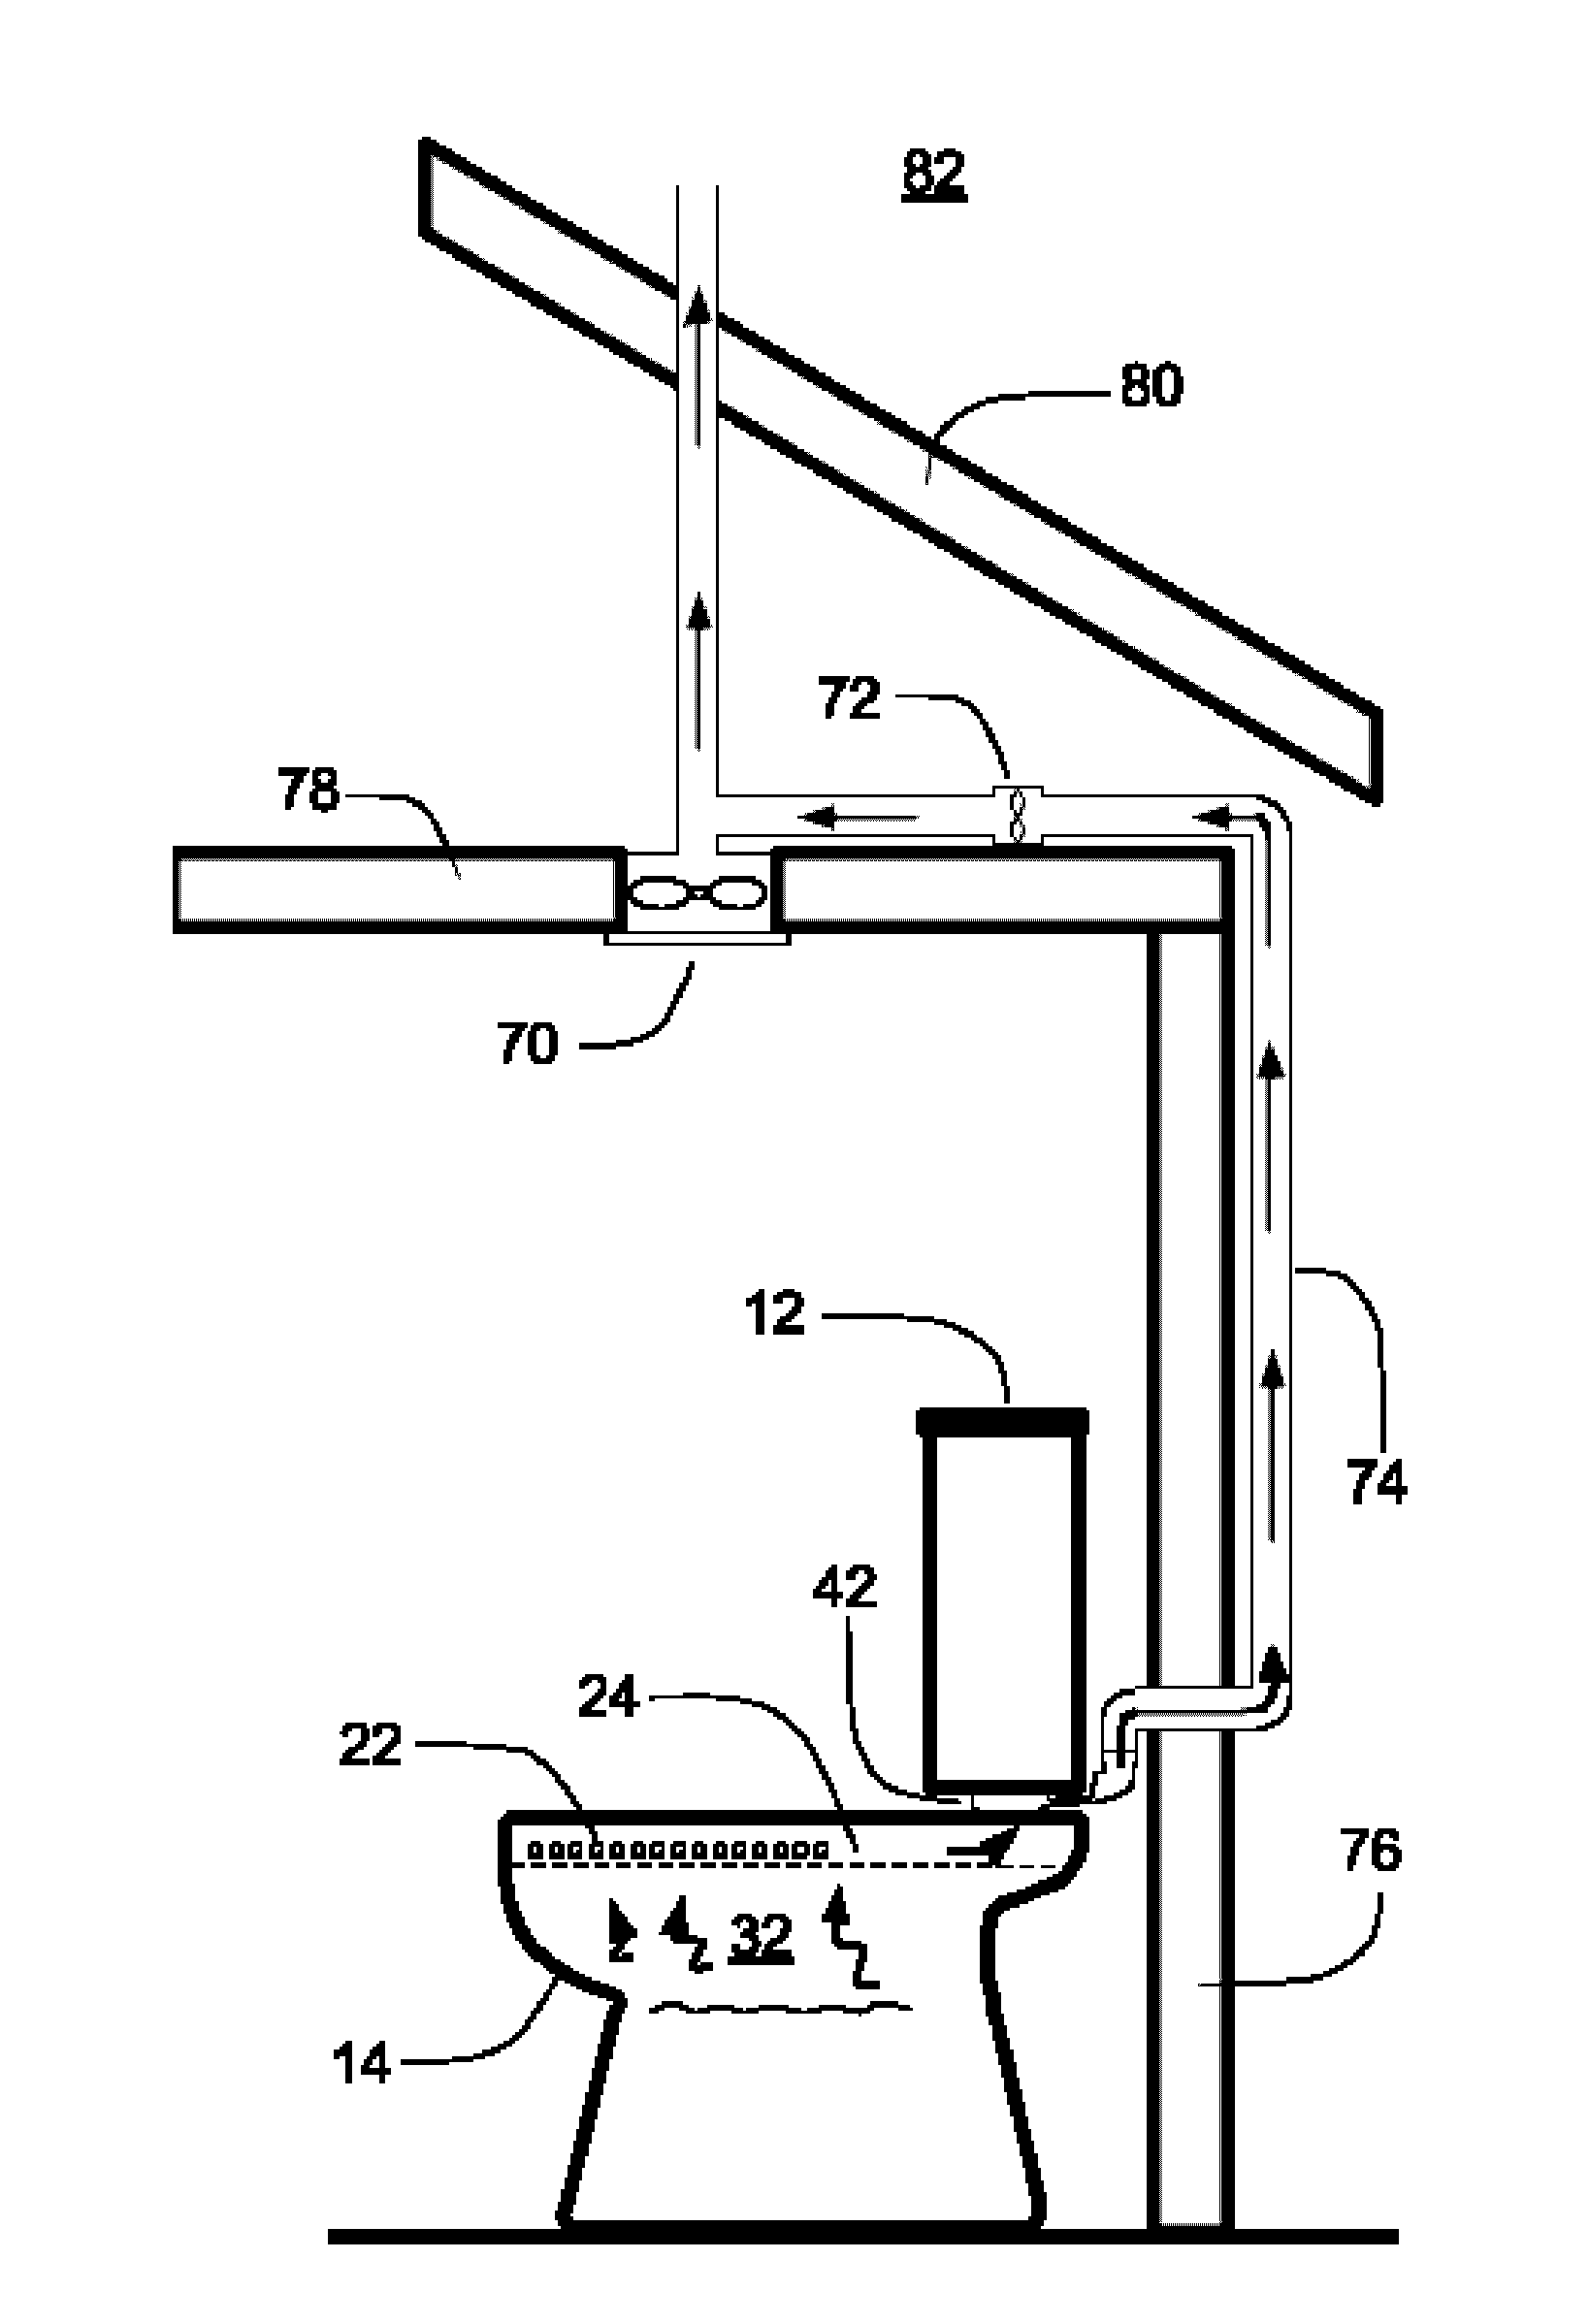 Device for venting odors from a toilet bowl